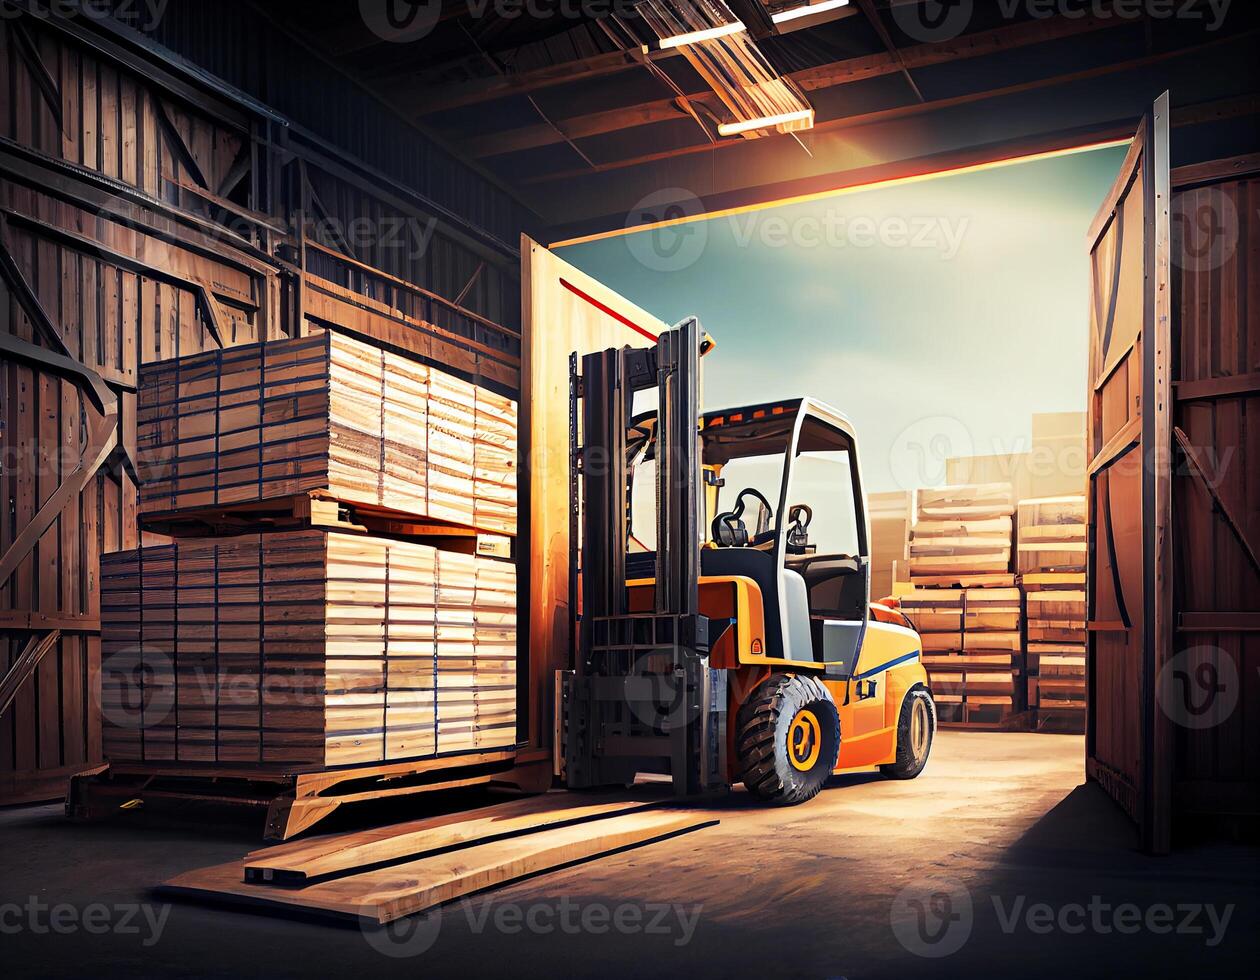 Forklift cartoon style center of logistic storage with wooden Warehouse industrial working storing material. photo